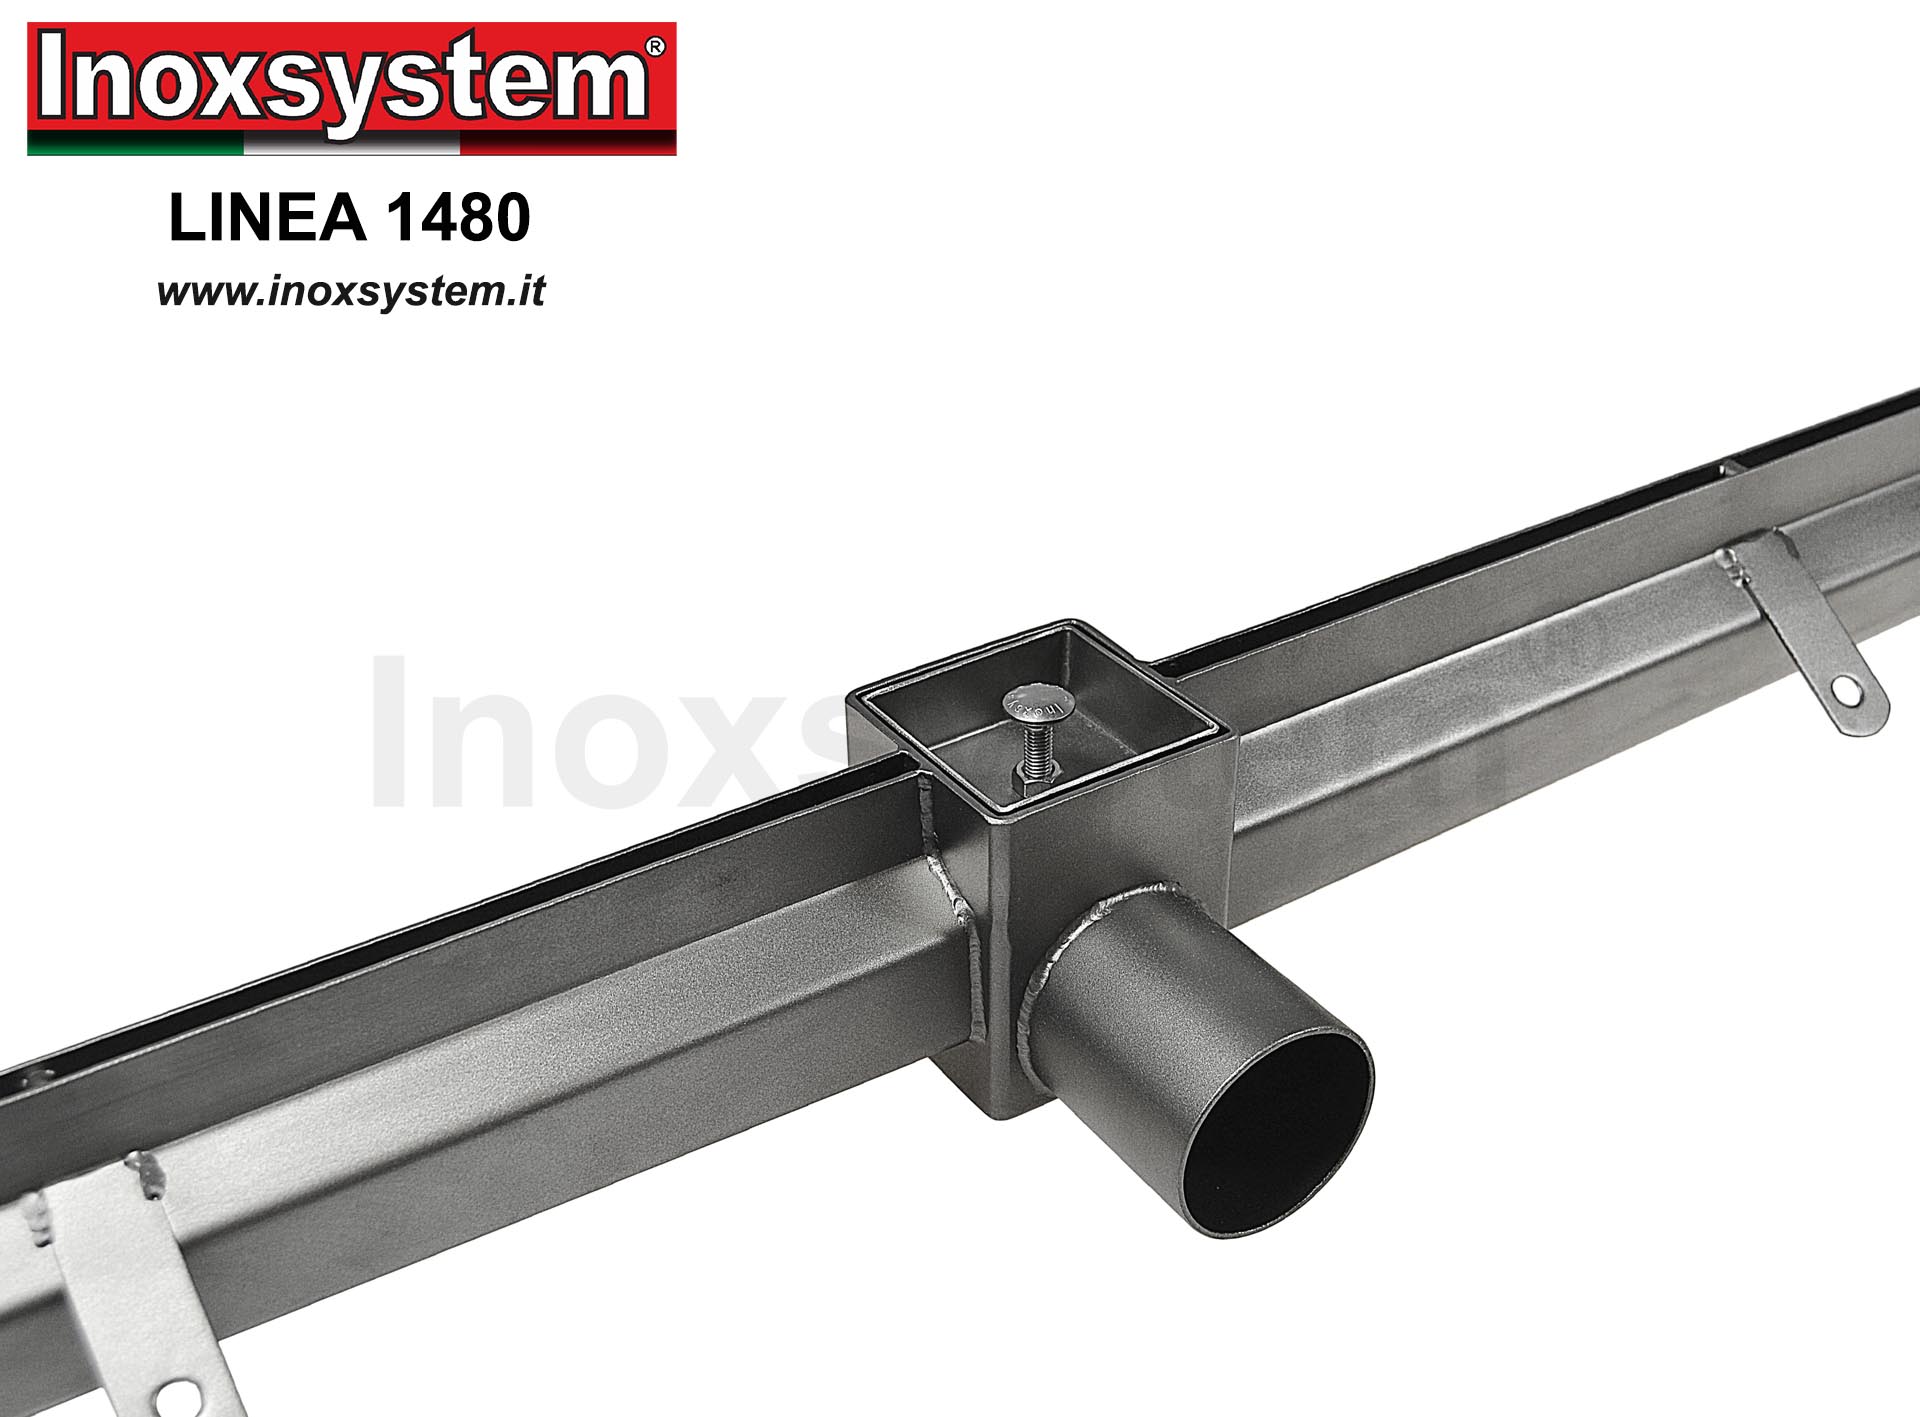 inoxsystem stainless steel drainage channel with gully